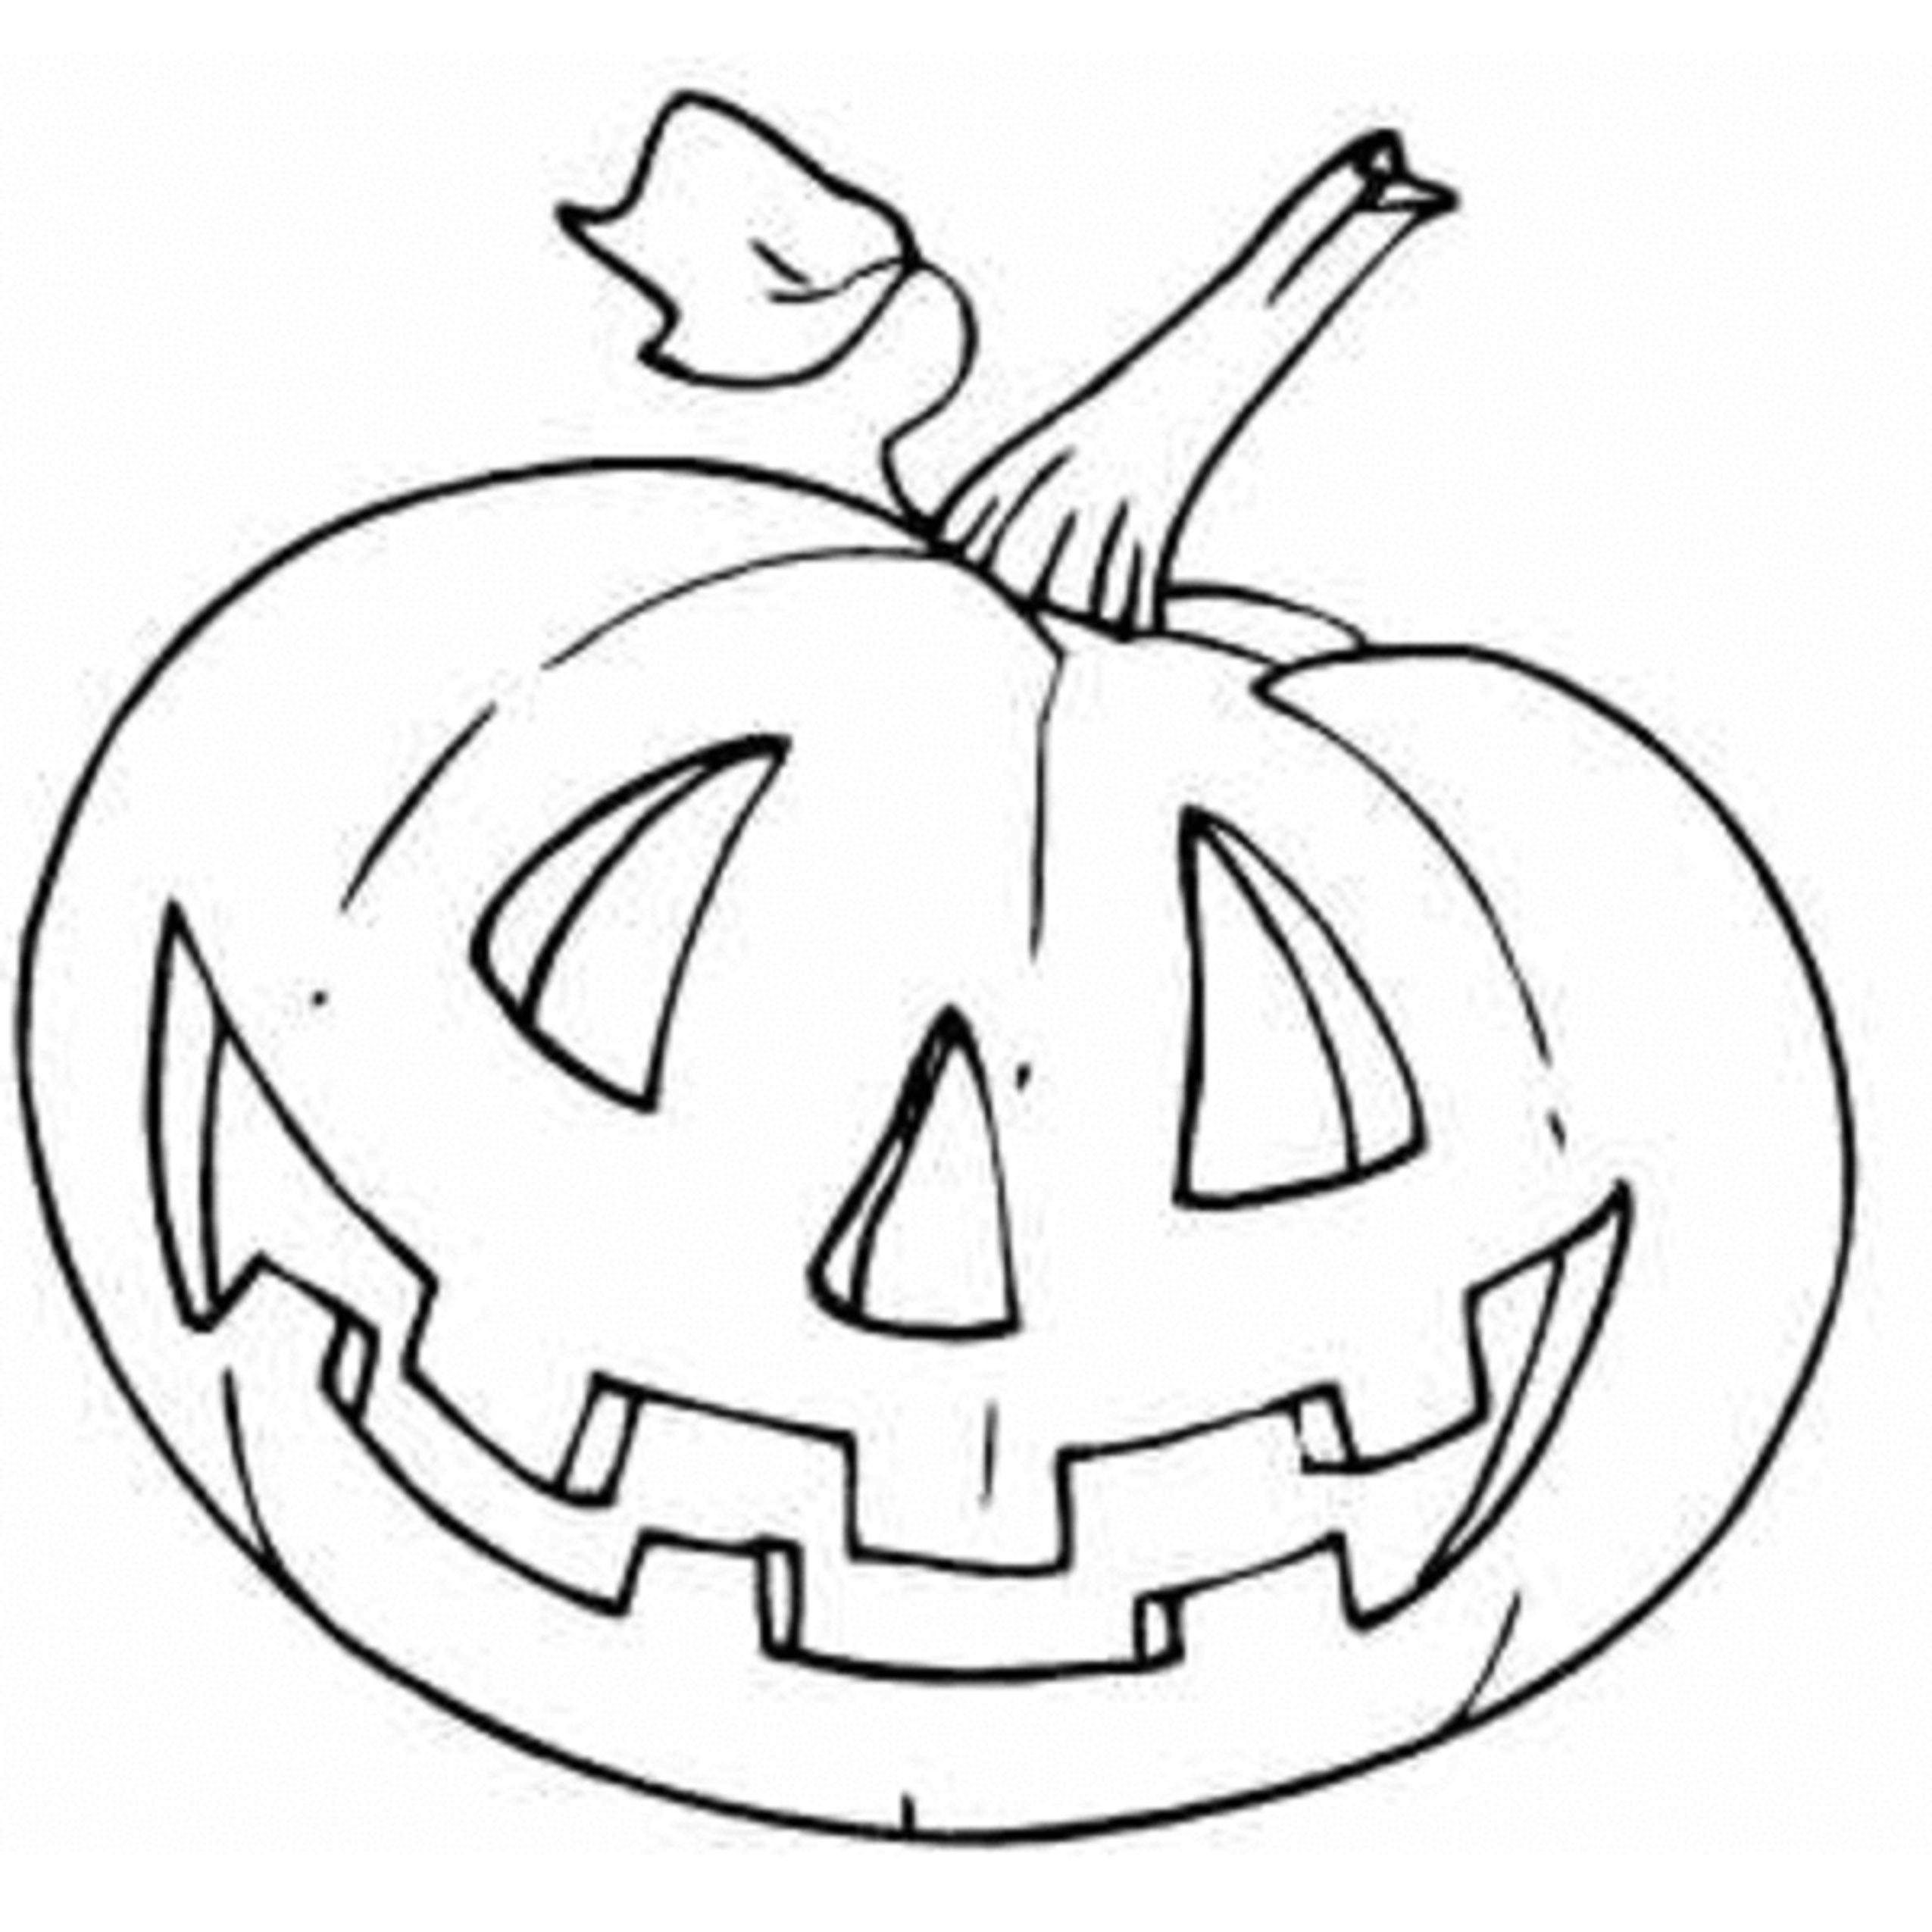 Coloring page: Pumpkin (Objects) #166959 - Free Printable Coloring Pages